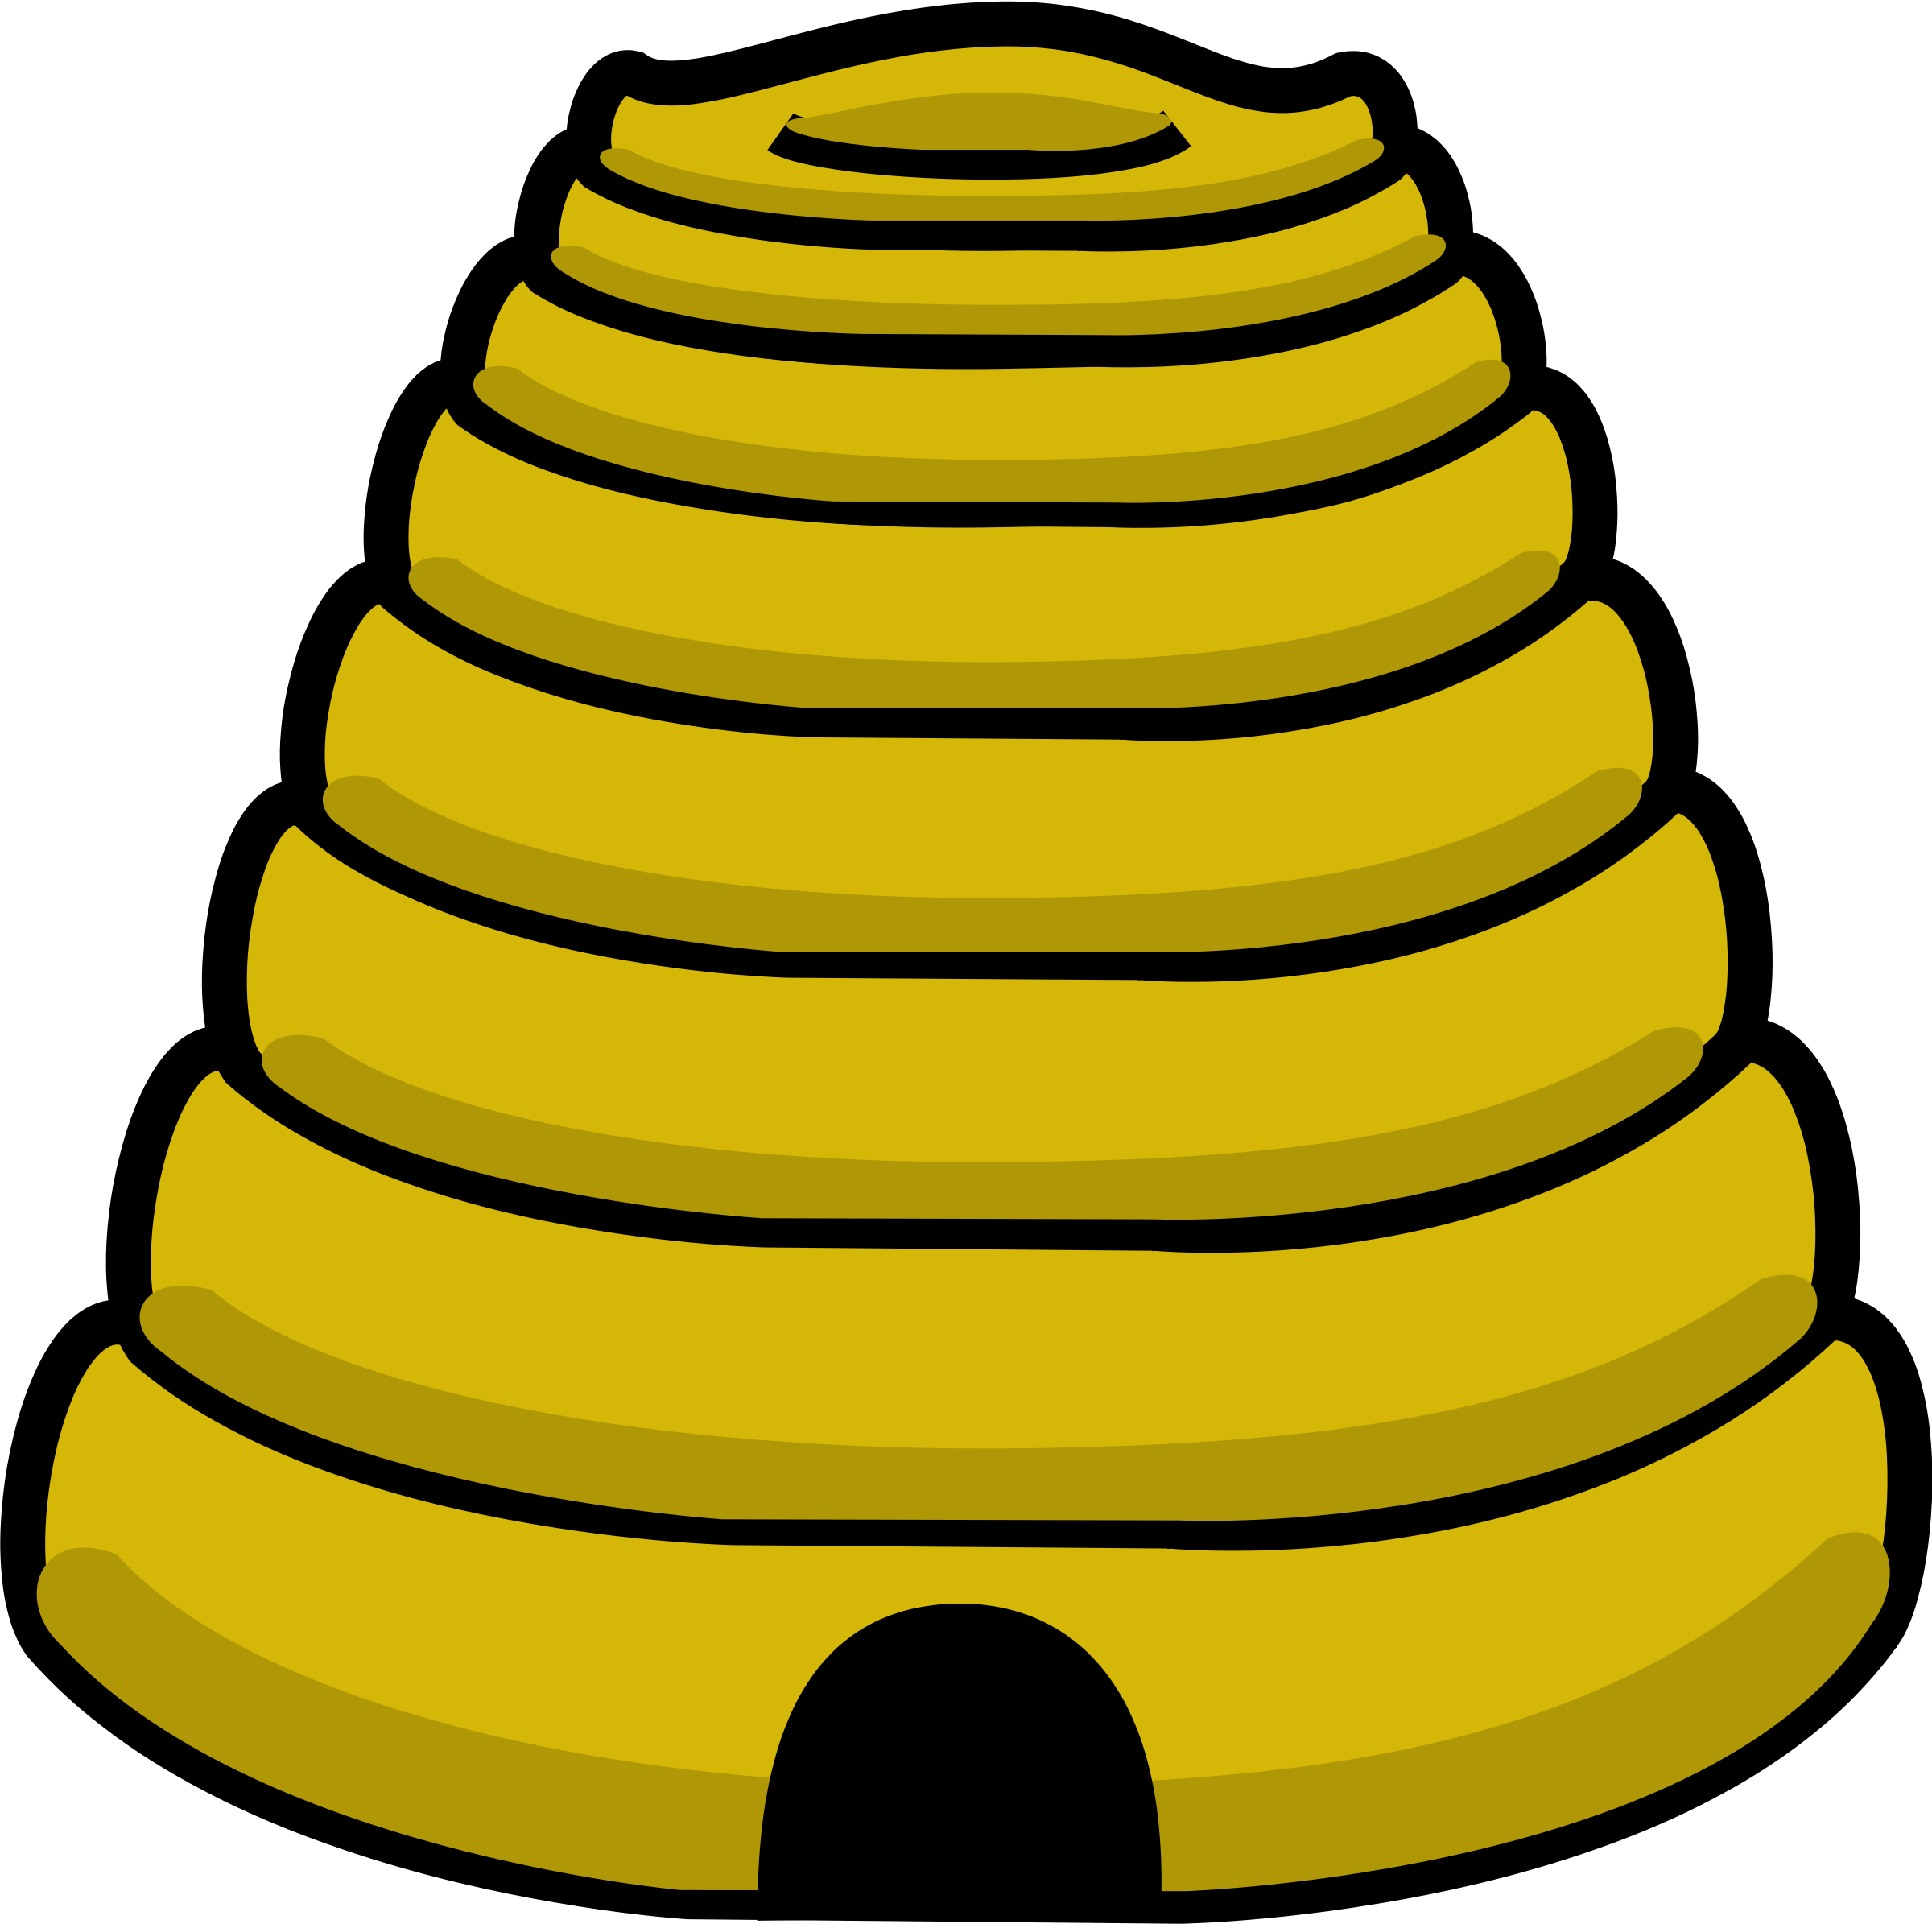 Picture Of Bee Hive - Cartoon Bumble Bee Hive - (2400x2390) Png Clipart Dow...